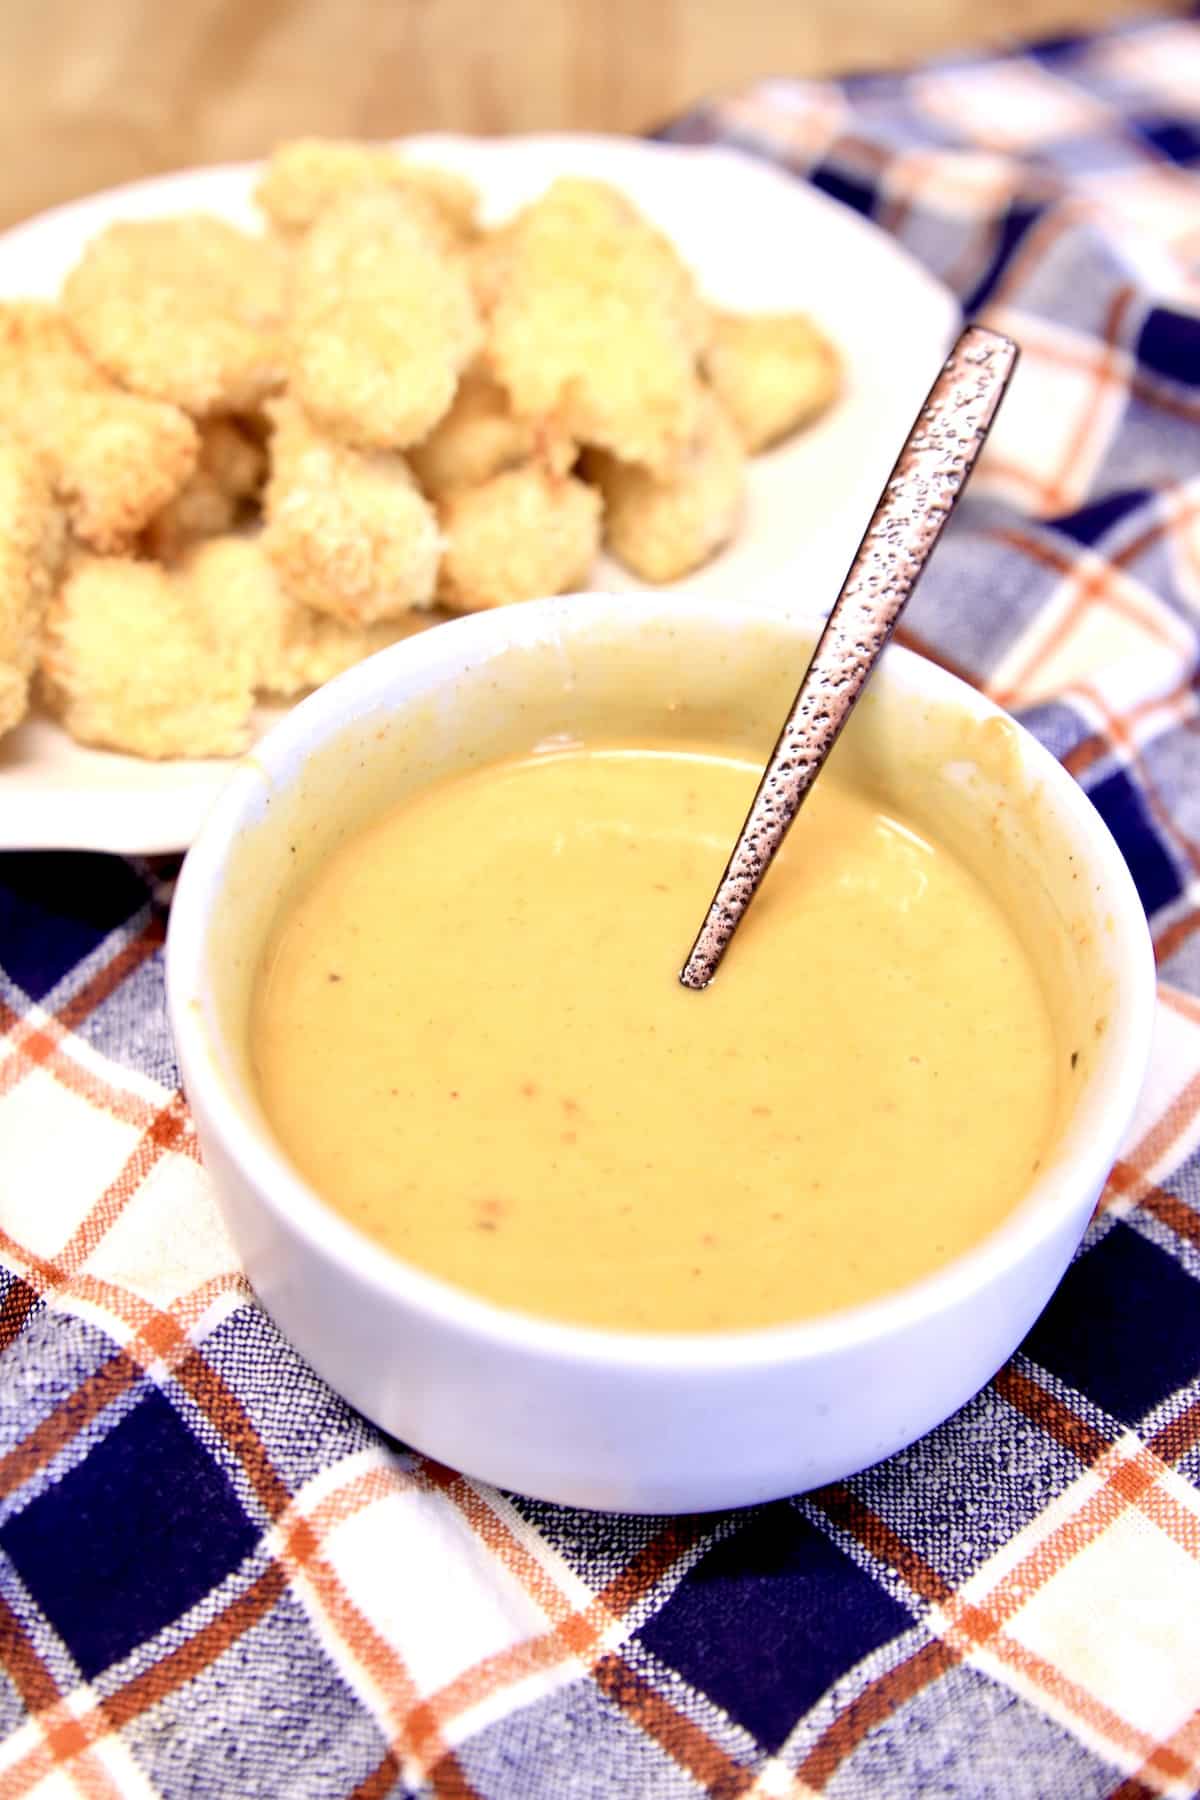 Platter of chicken nuggets, bowl of dipping sauce with spoon.